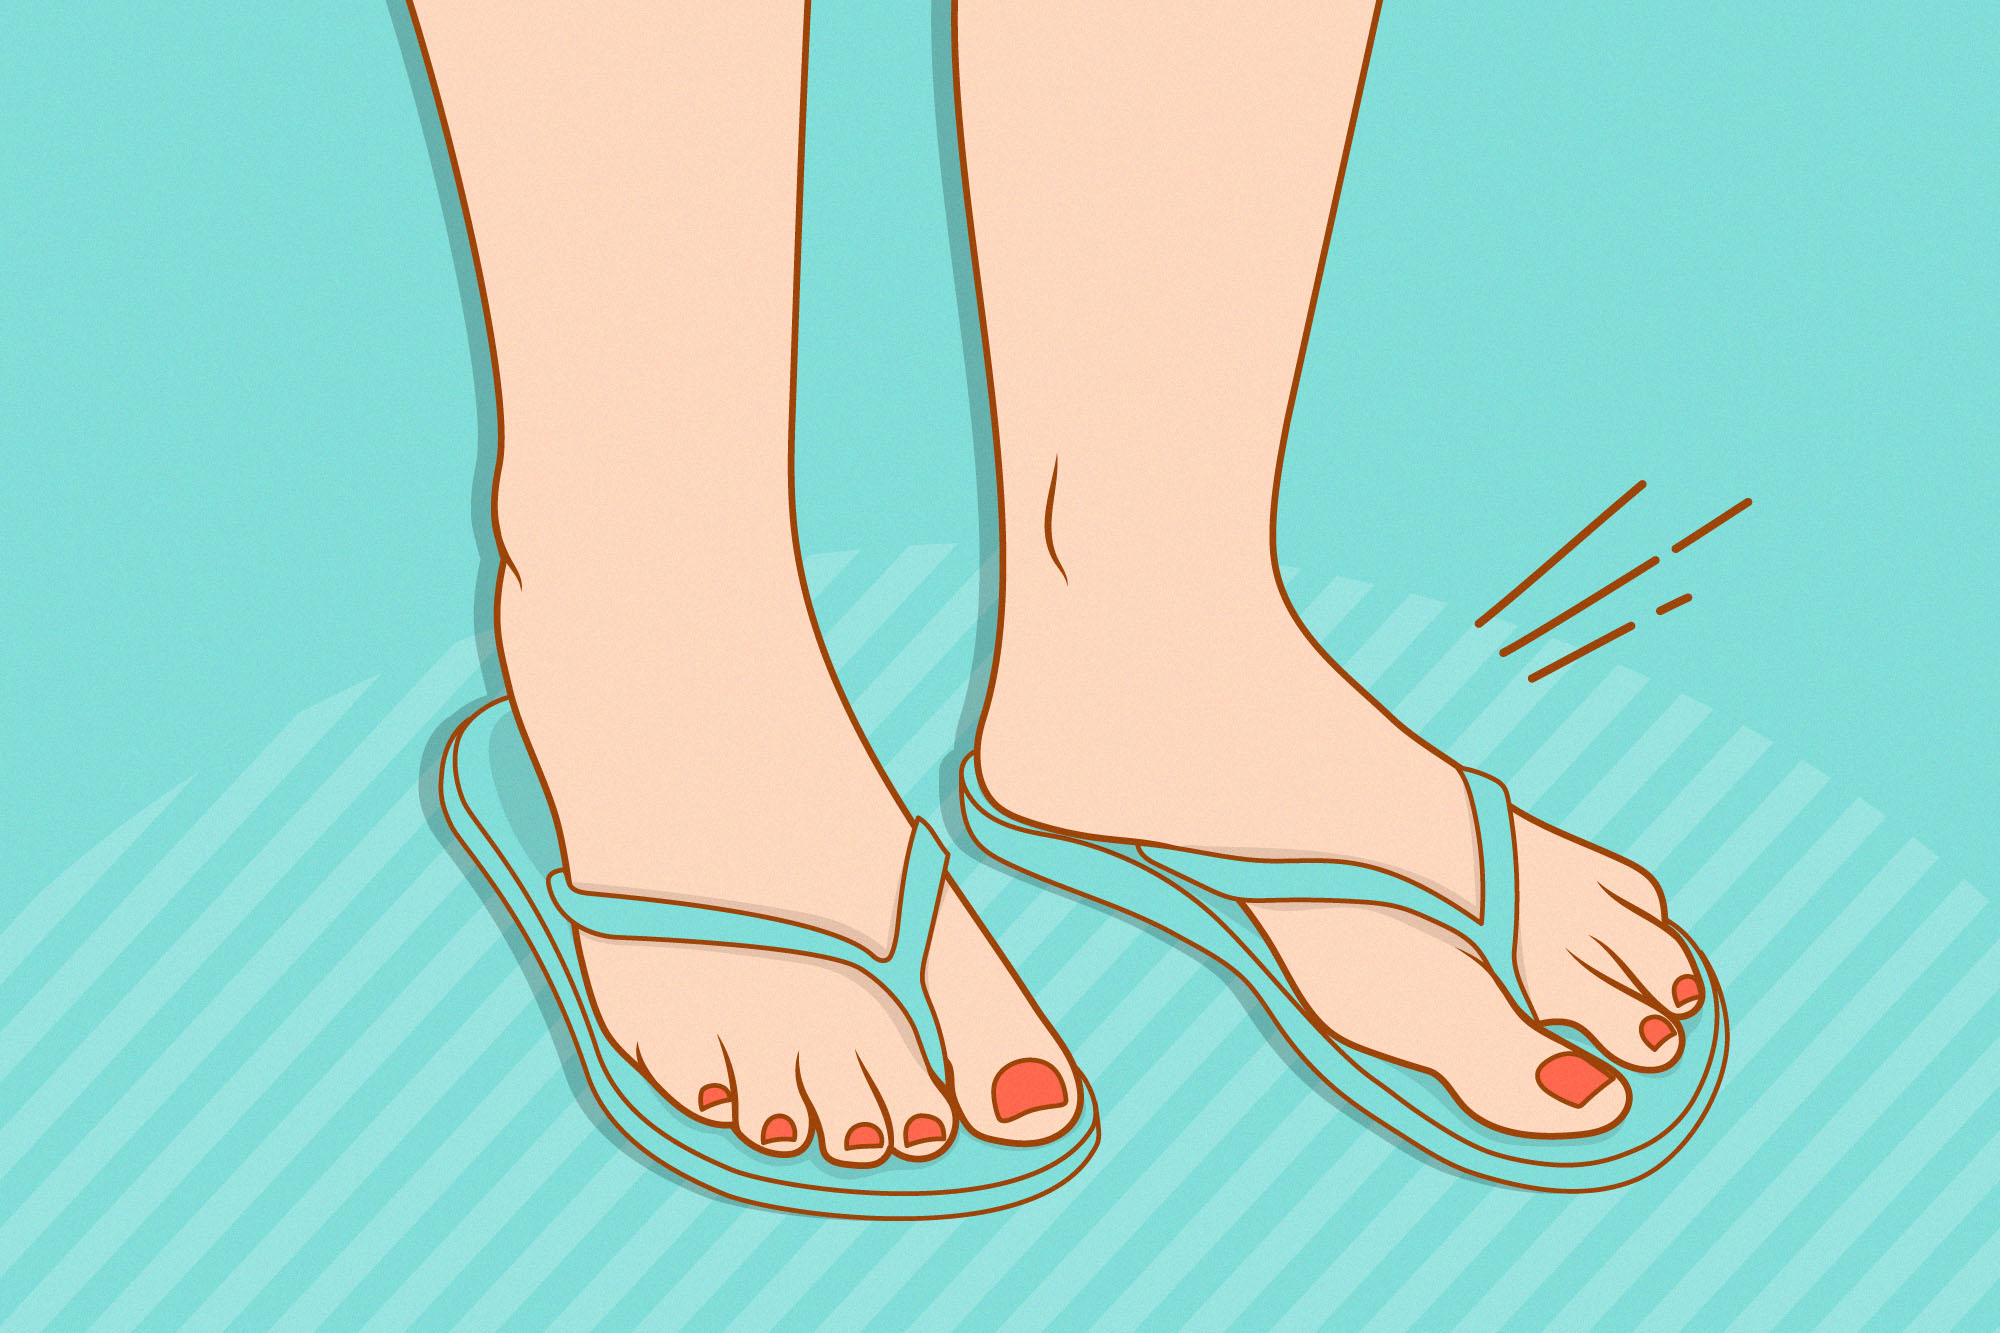 Is It Bad to Wear Flip-Flops All the Time?